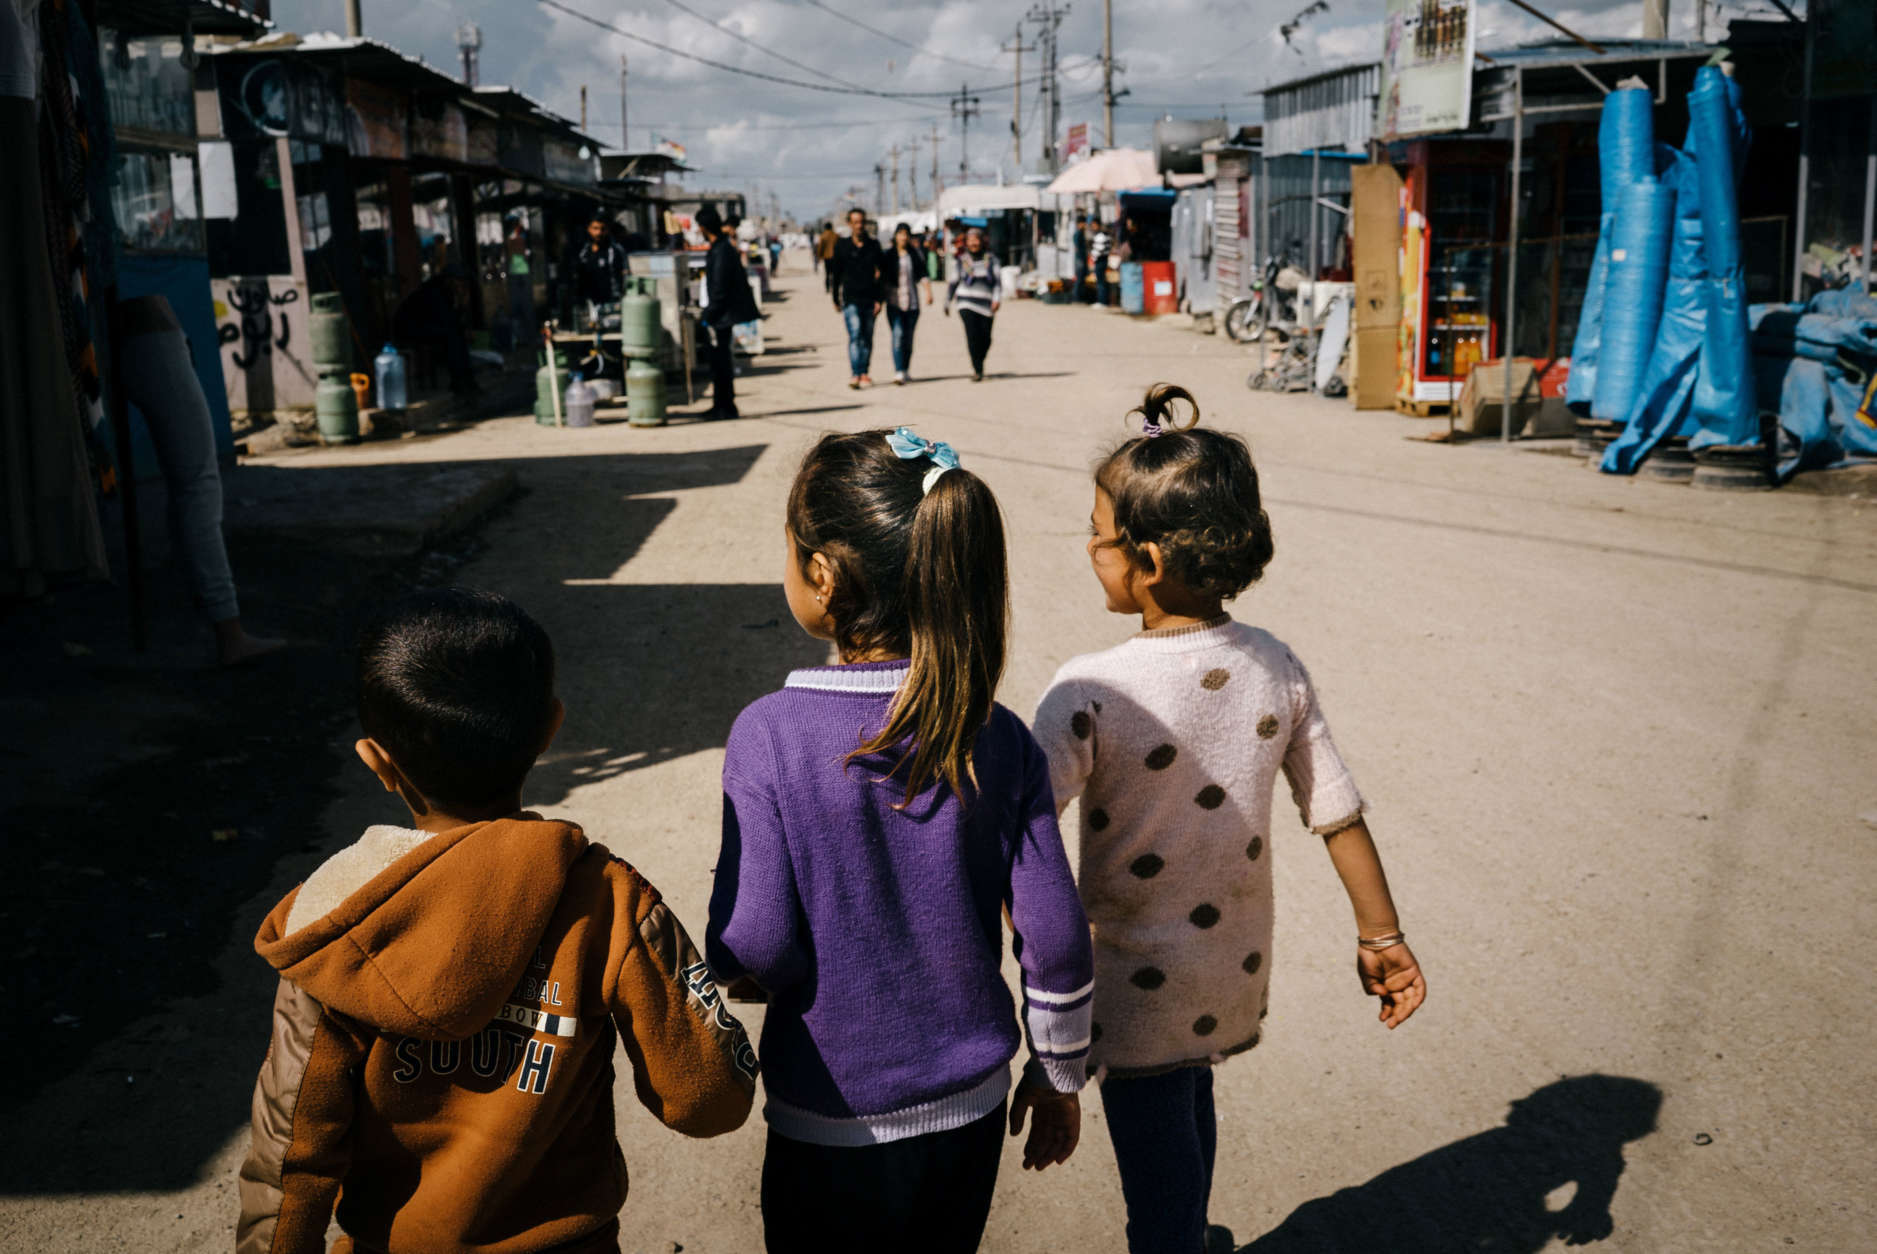 In this March 6, 2016 photo, Winda Farman Haji, right, a 5-year-old refugee from a town outside Malikiyah in northeast Syria, walks back to her tent after school alongside friends at Kawergosk refugee camp in Iraq where she has lived since 2012 . Winda shows great talent in drawing and her parents say she is very impatient to go to kindergarten every morning. (AP Photo/Alice Martins)